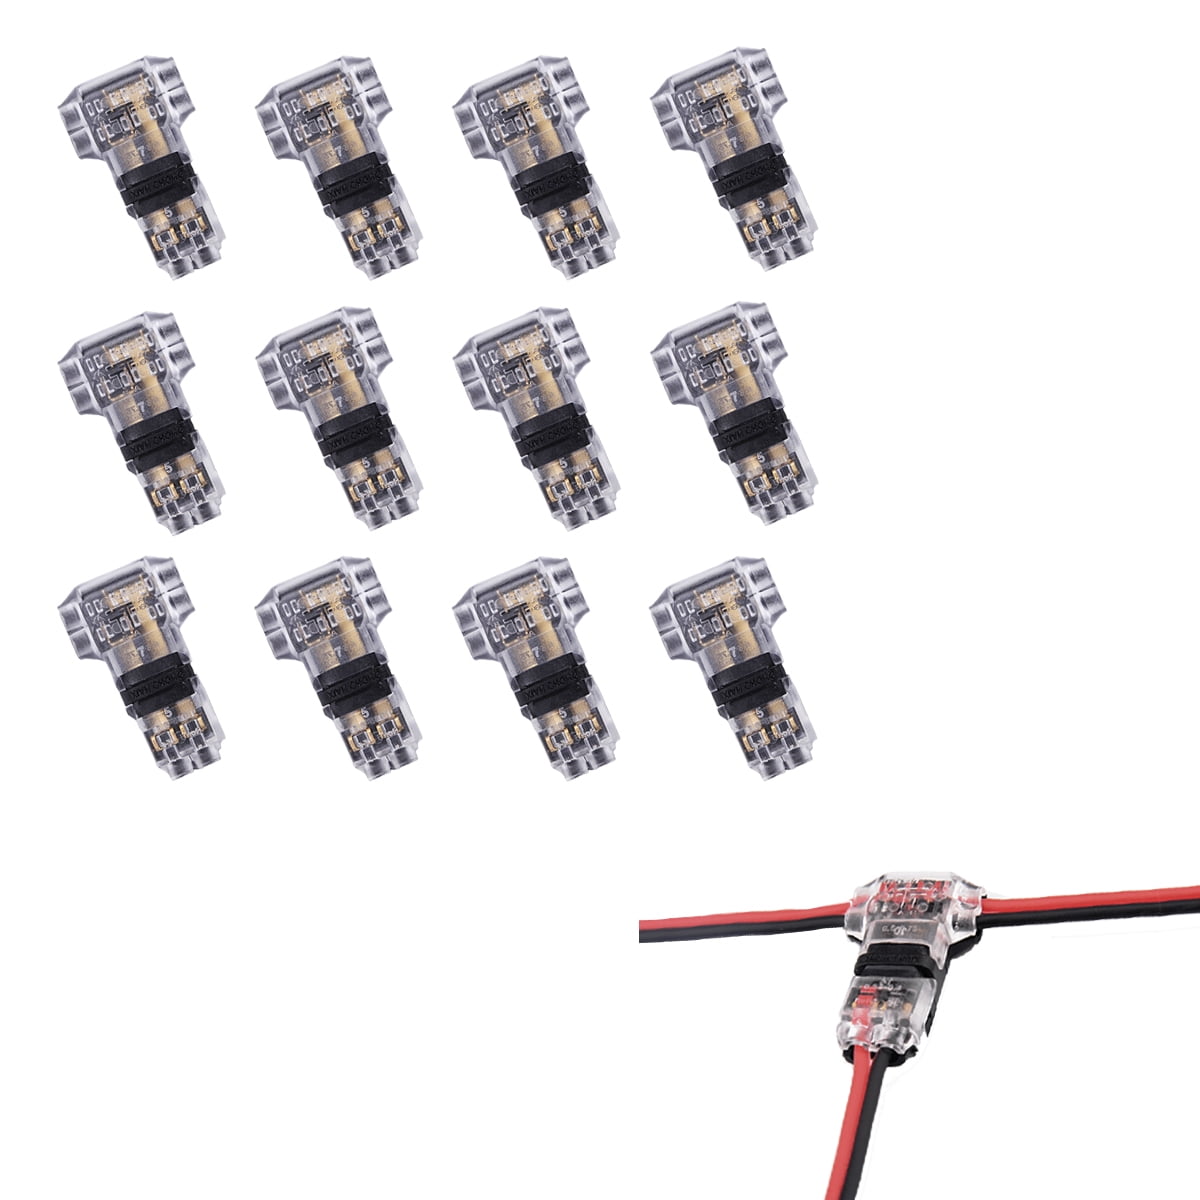 Pack of 15 Low Voltage Solderless Wire Connectors with No Wire-Stripping Required for Mid-Span Branching Wires Connection 20/22 AWG Cable by brightfour Wire Connectors Set 